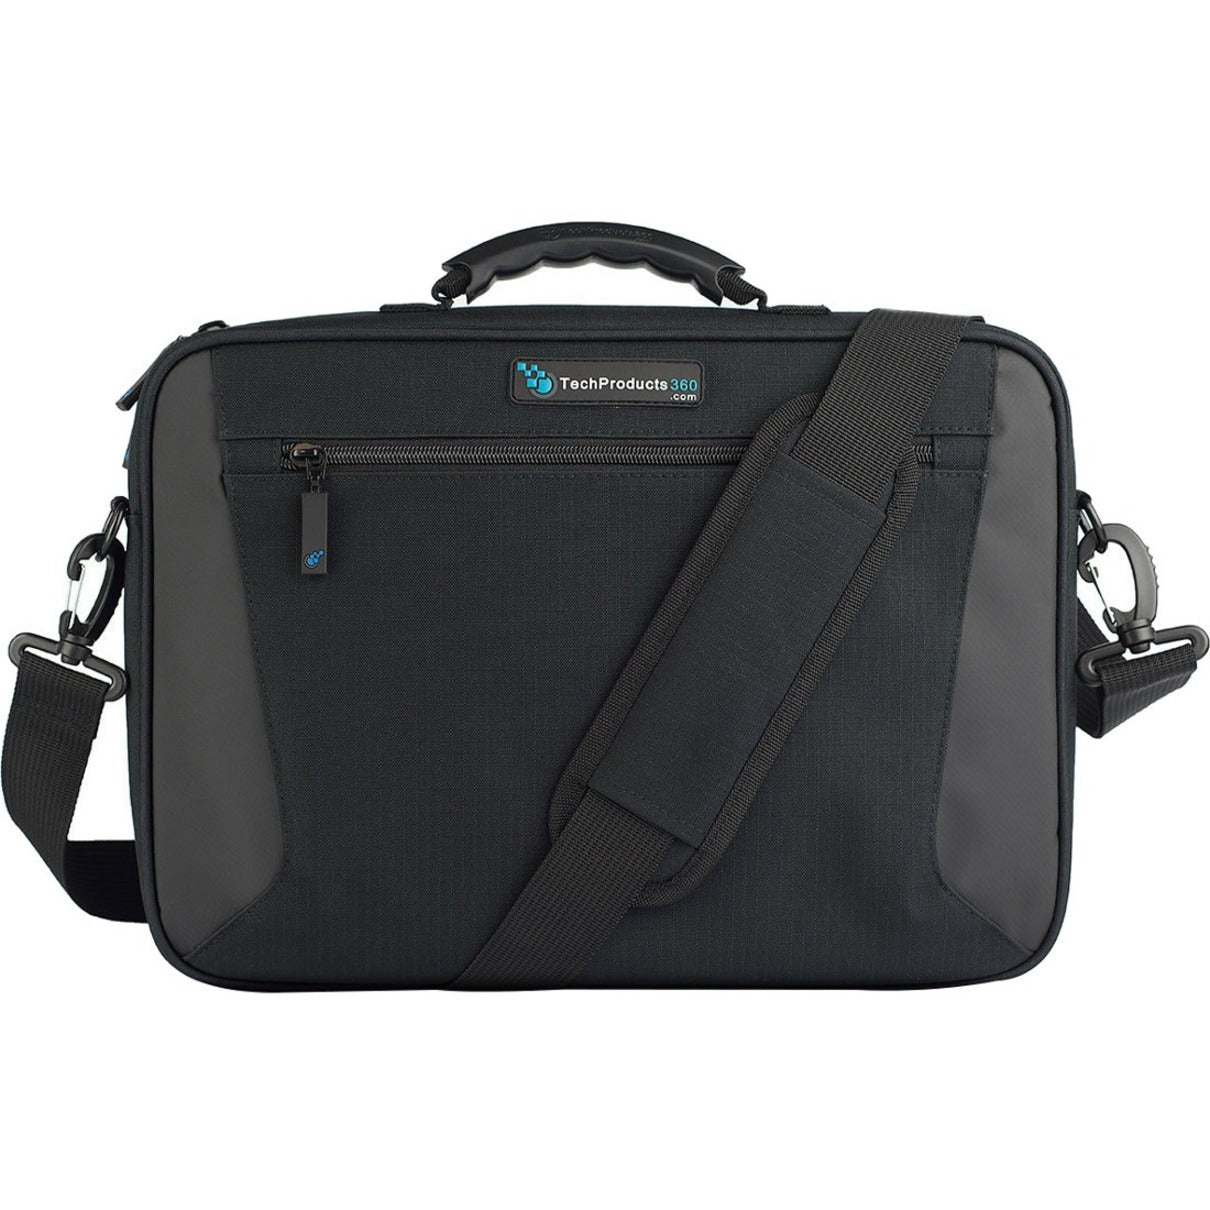 TechProducts360 Alpha Carrying Case for 14" Notebook